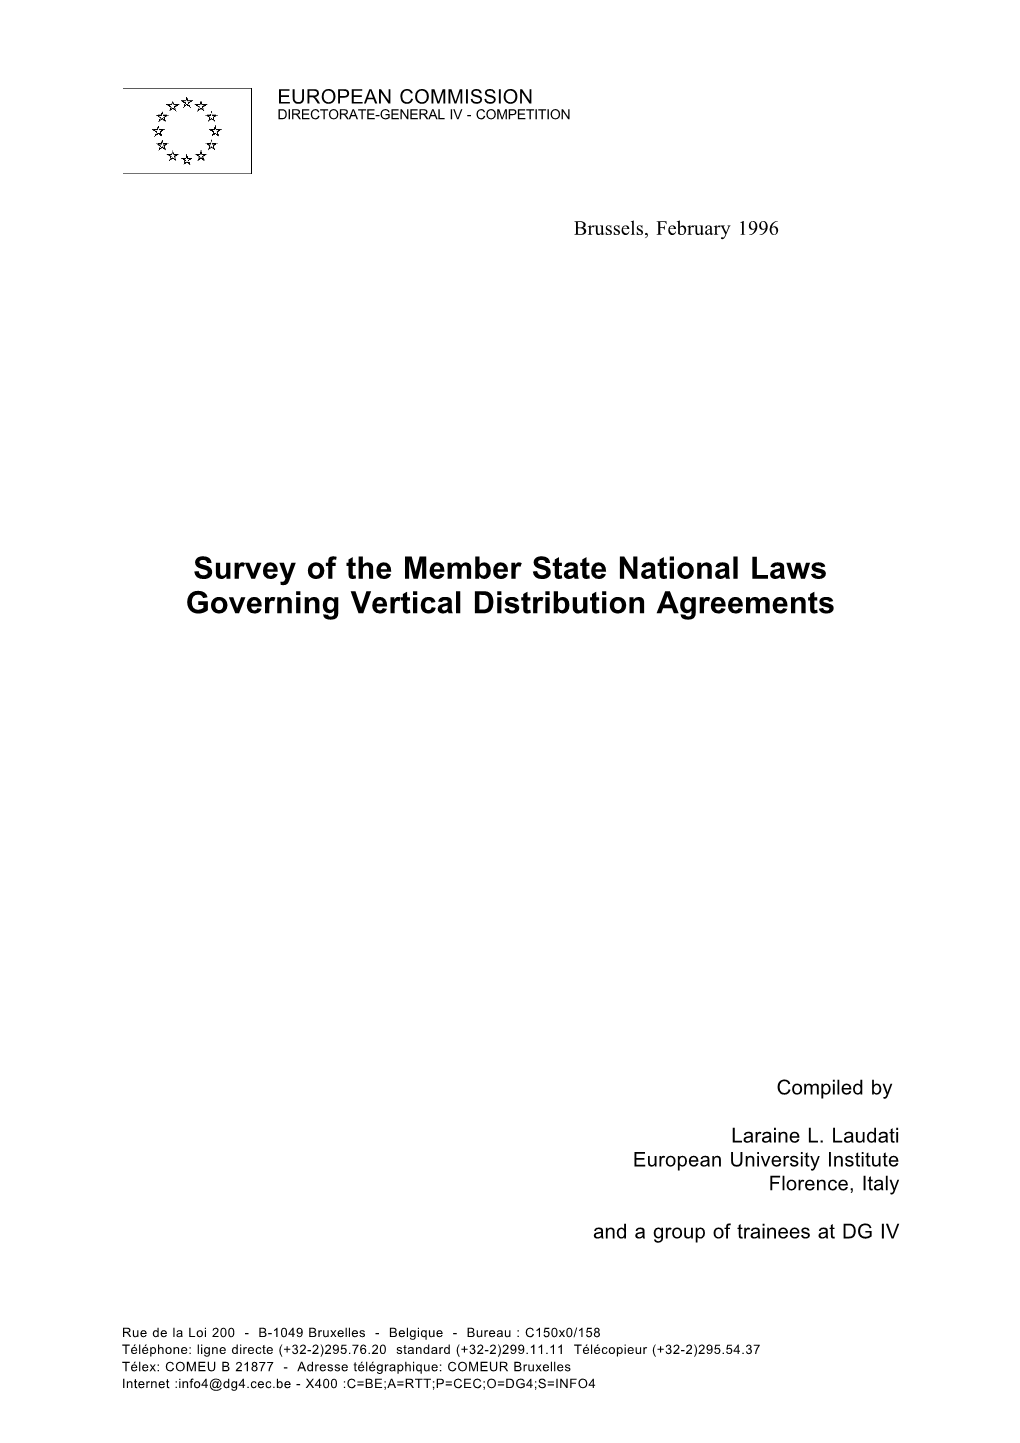 Survey of the Member State National Laws Governing Vertical Distribution Agreements